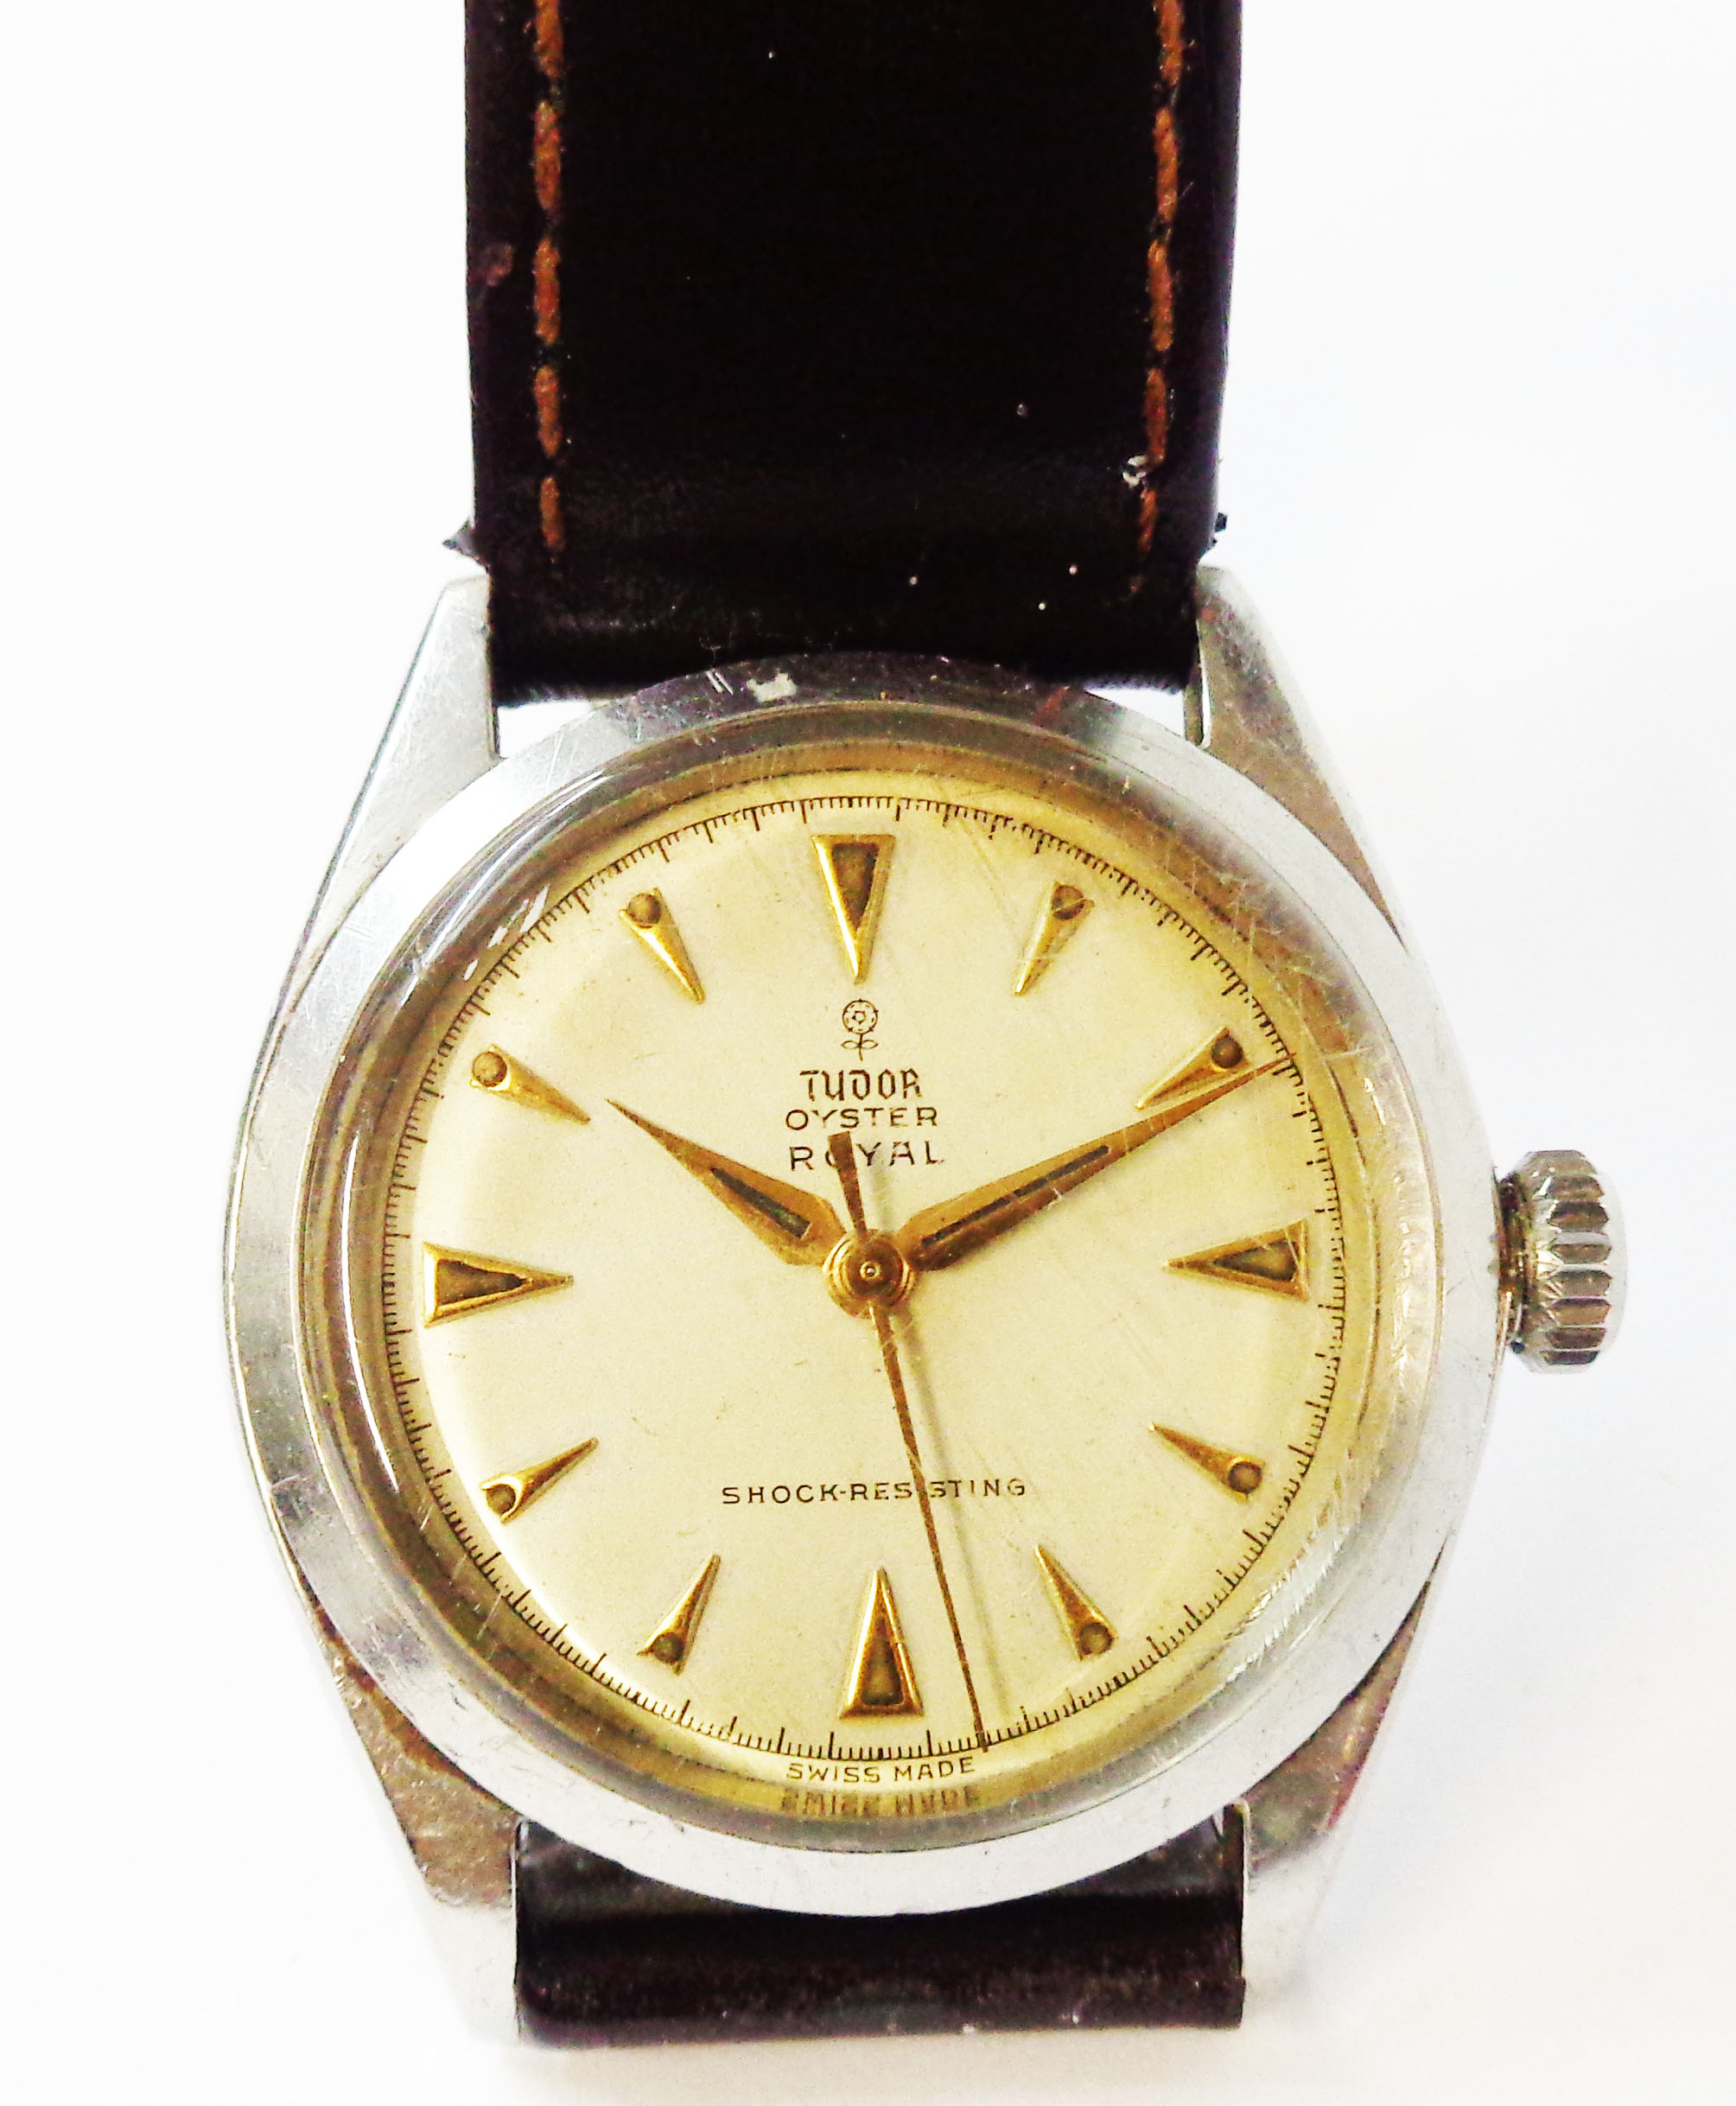 A vintage Tudor Oyster Royal gentleman's steel cased wristwatch with 28mm dial and manual wind